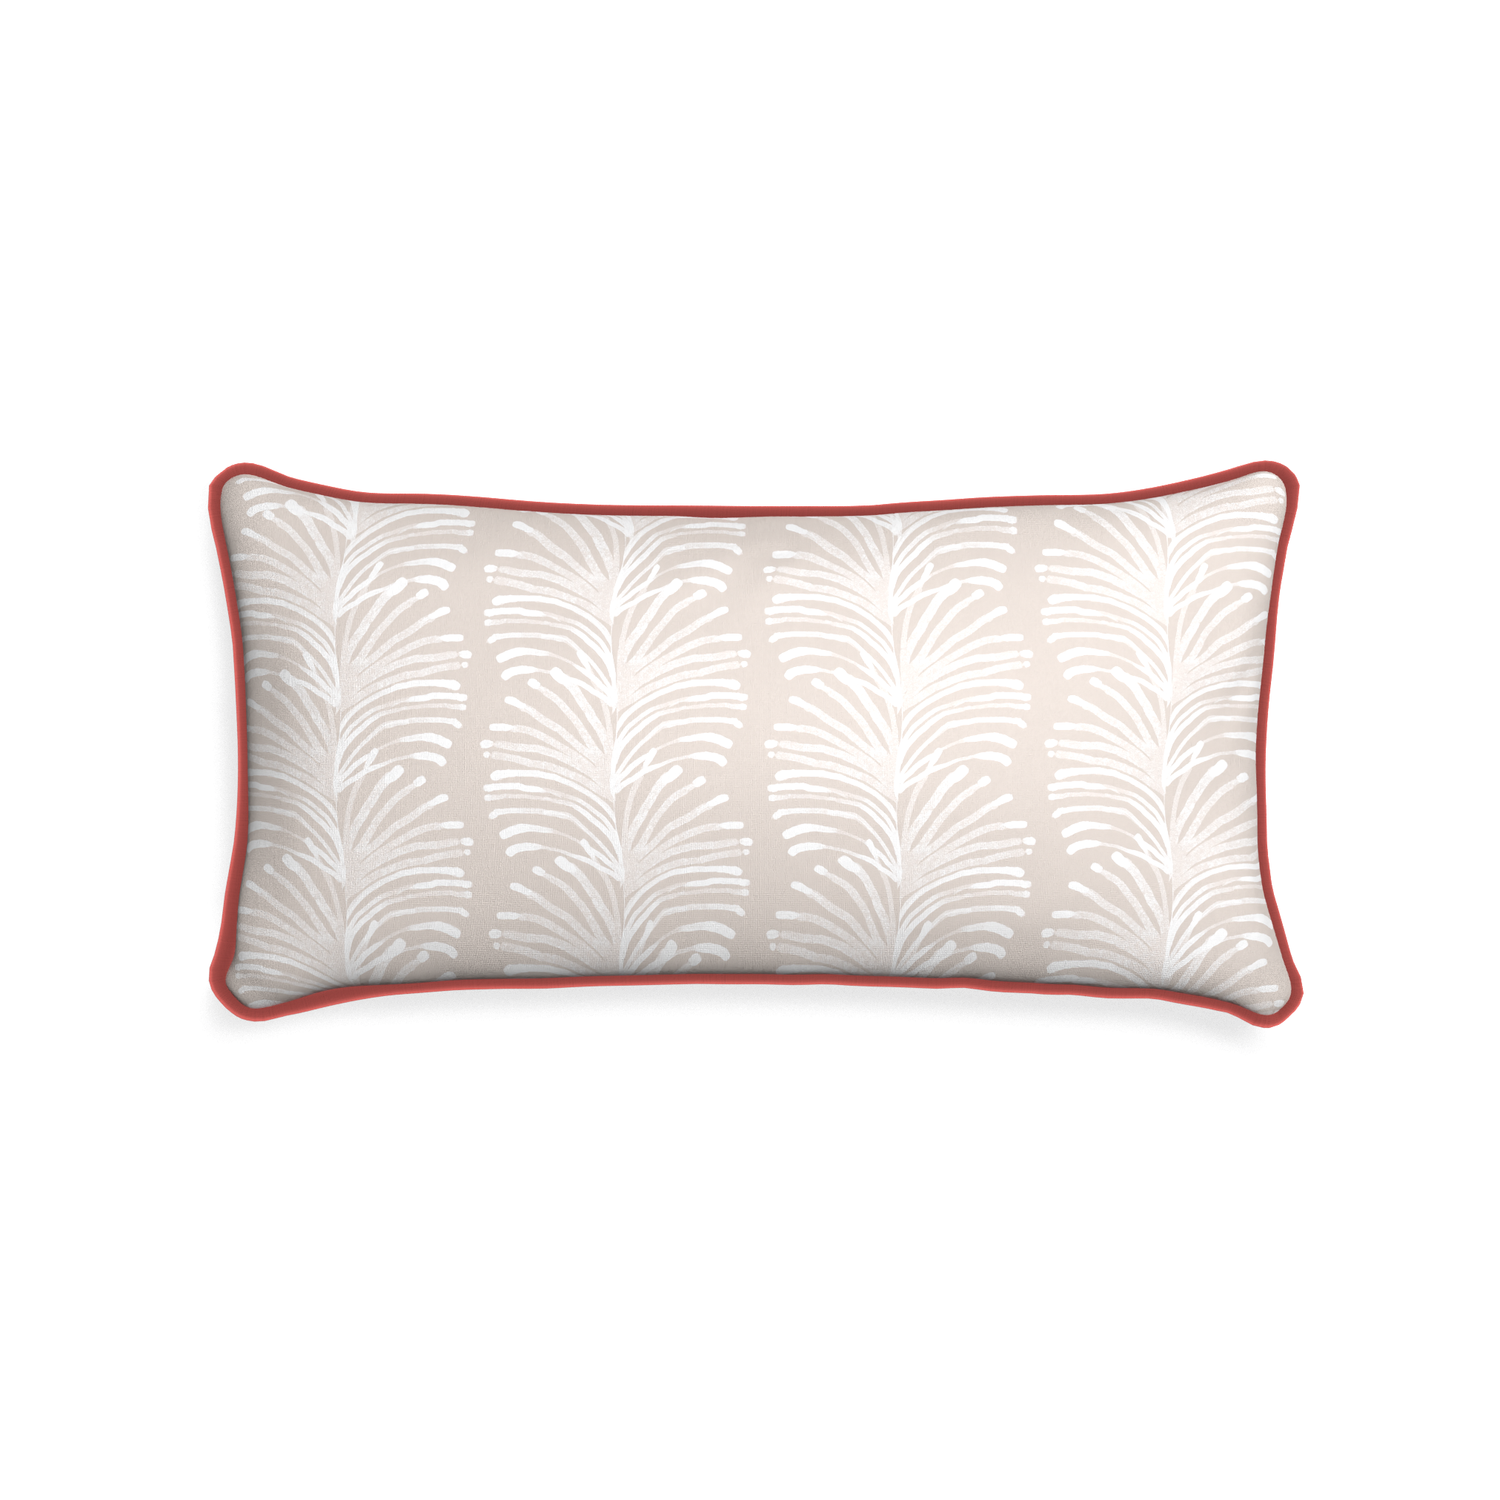 Midi-lumbar emma sand custom sand colored botanical stripepillow with c piping on white background